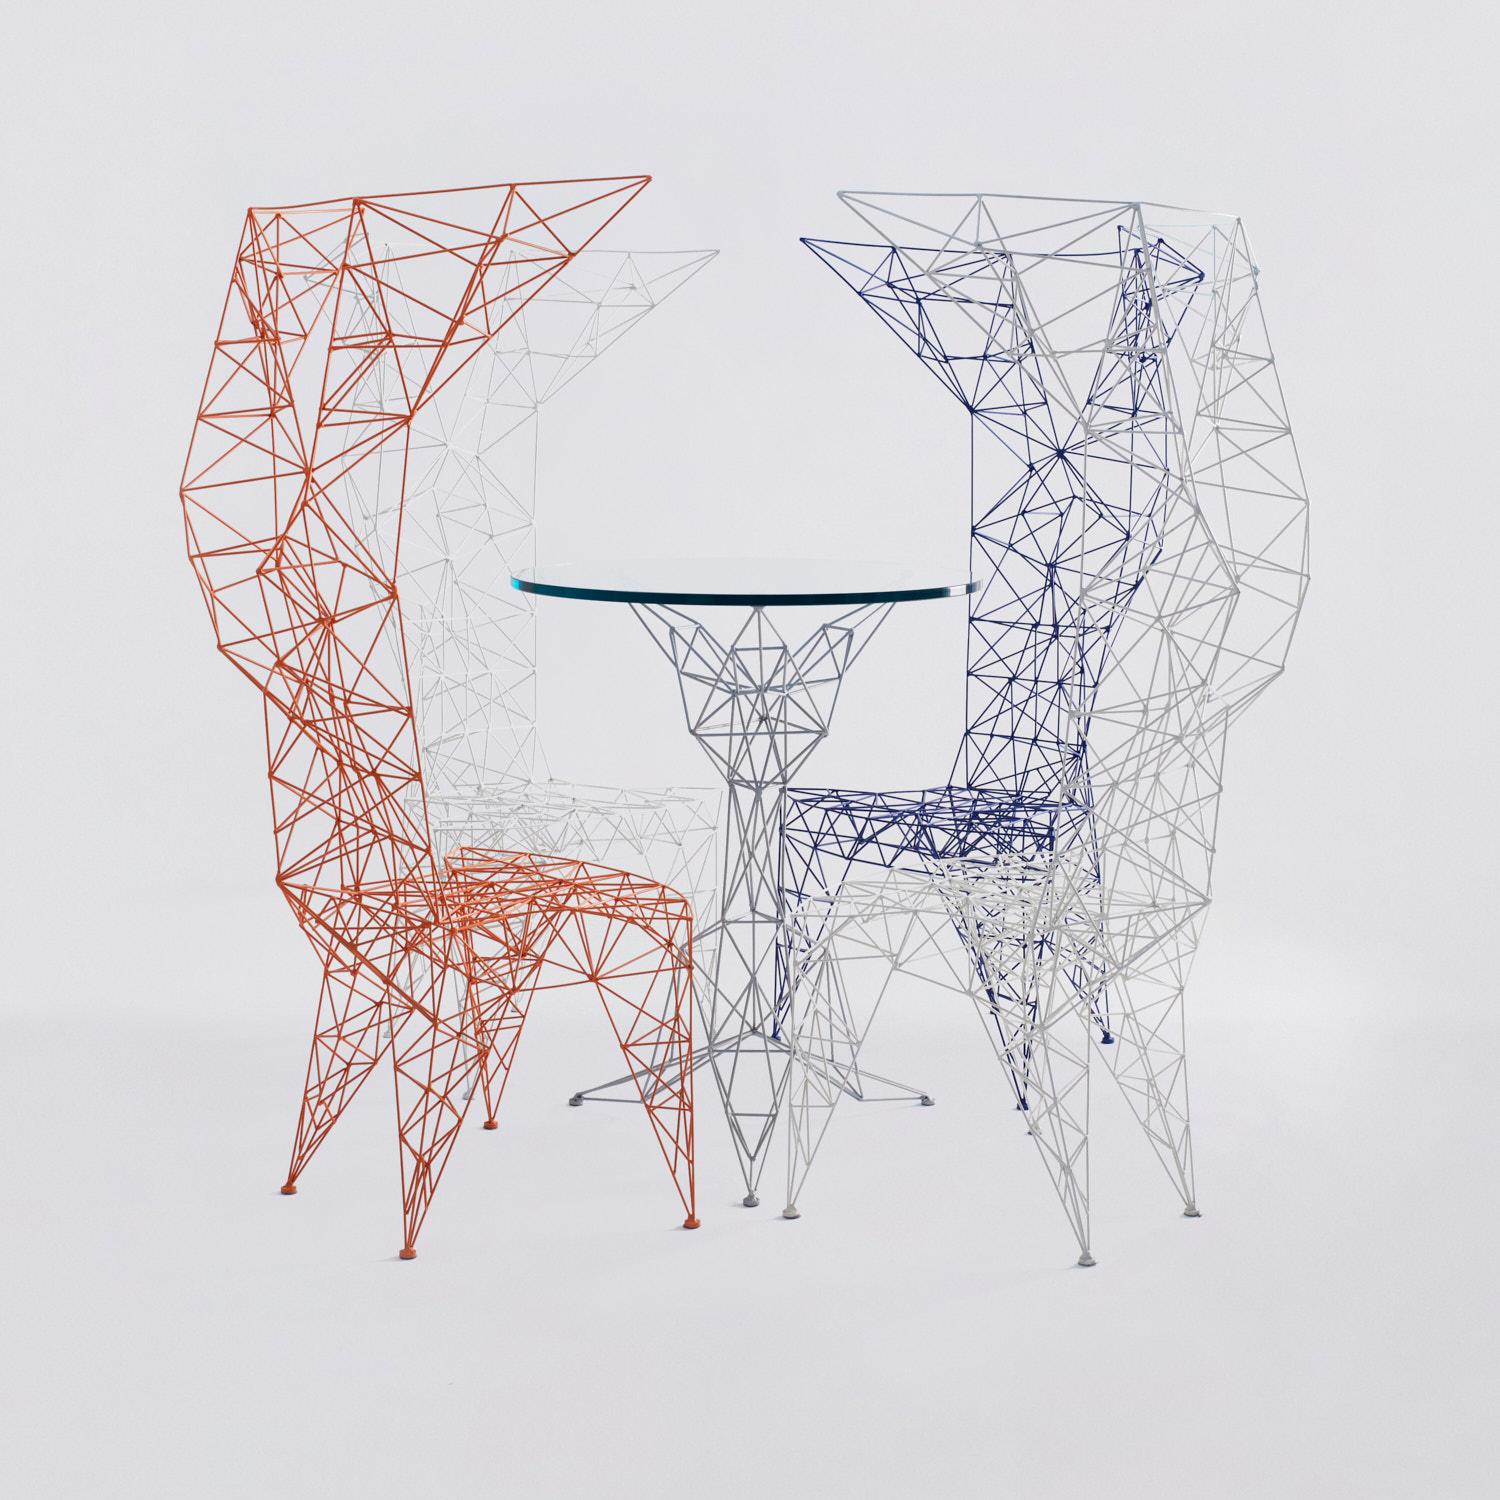 A truly rare and unique set of four colored Pylon chairs (table available as well) designed in 1992 by Tom Dixon for Cappellini. Intended to be the lightest chair ever, this iconic work of art is made from single iron sticks welded together one by